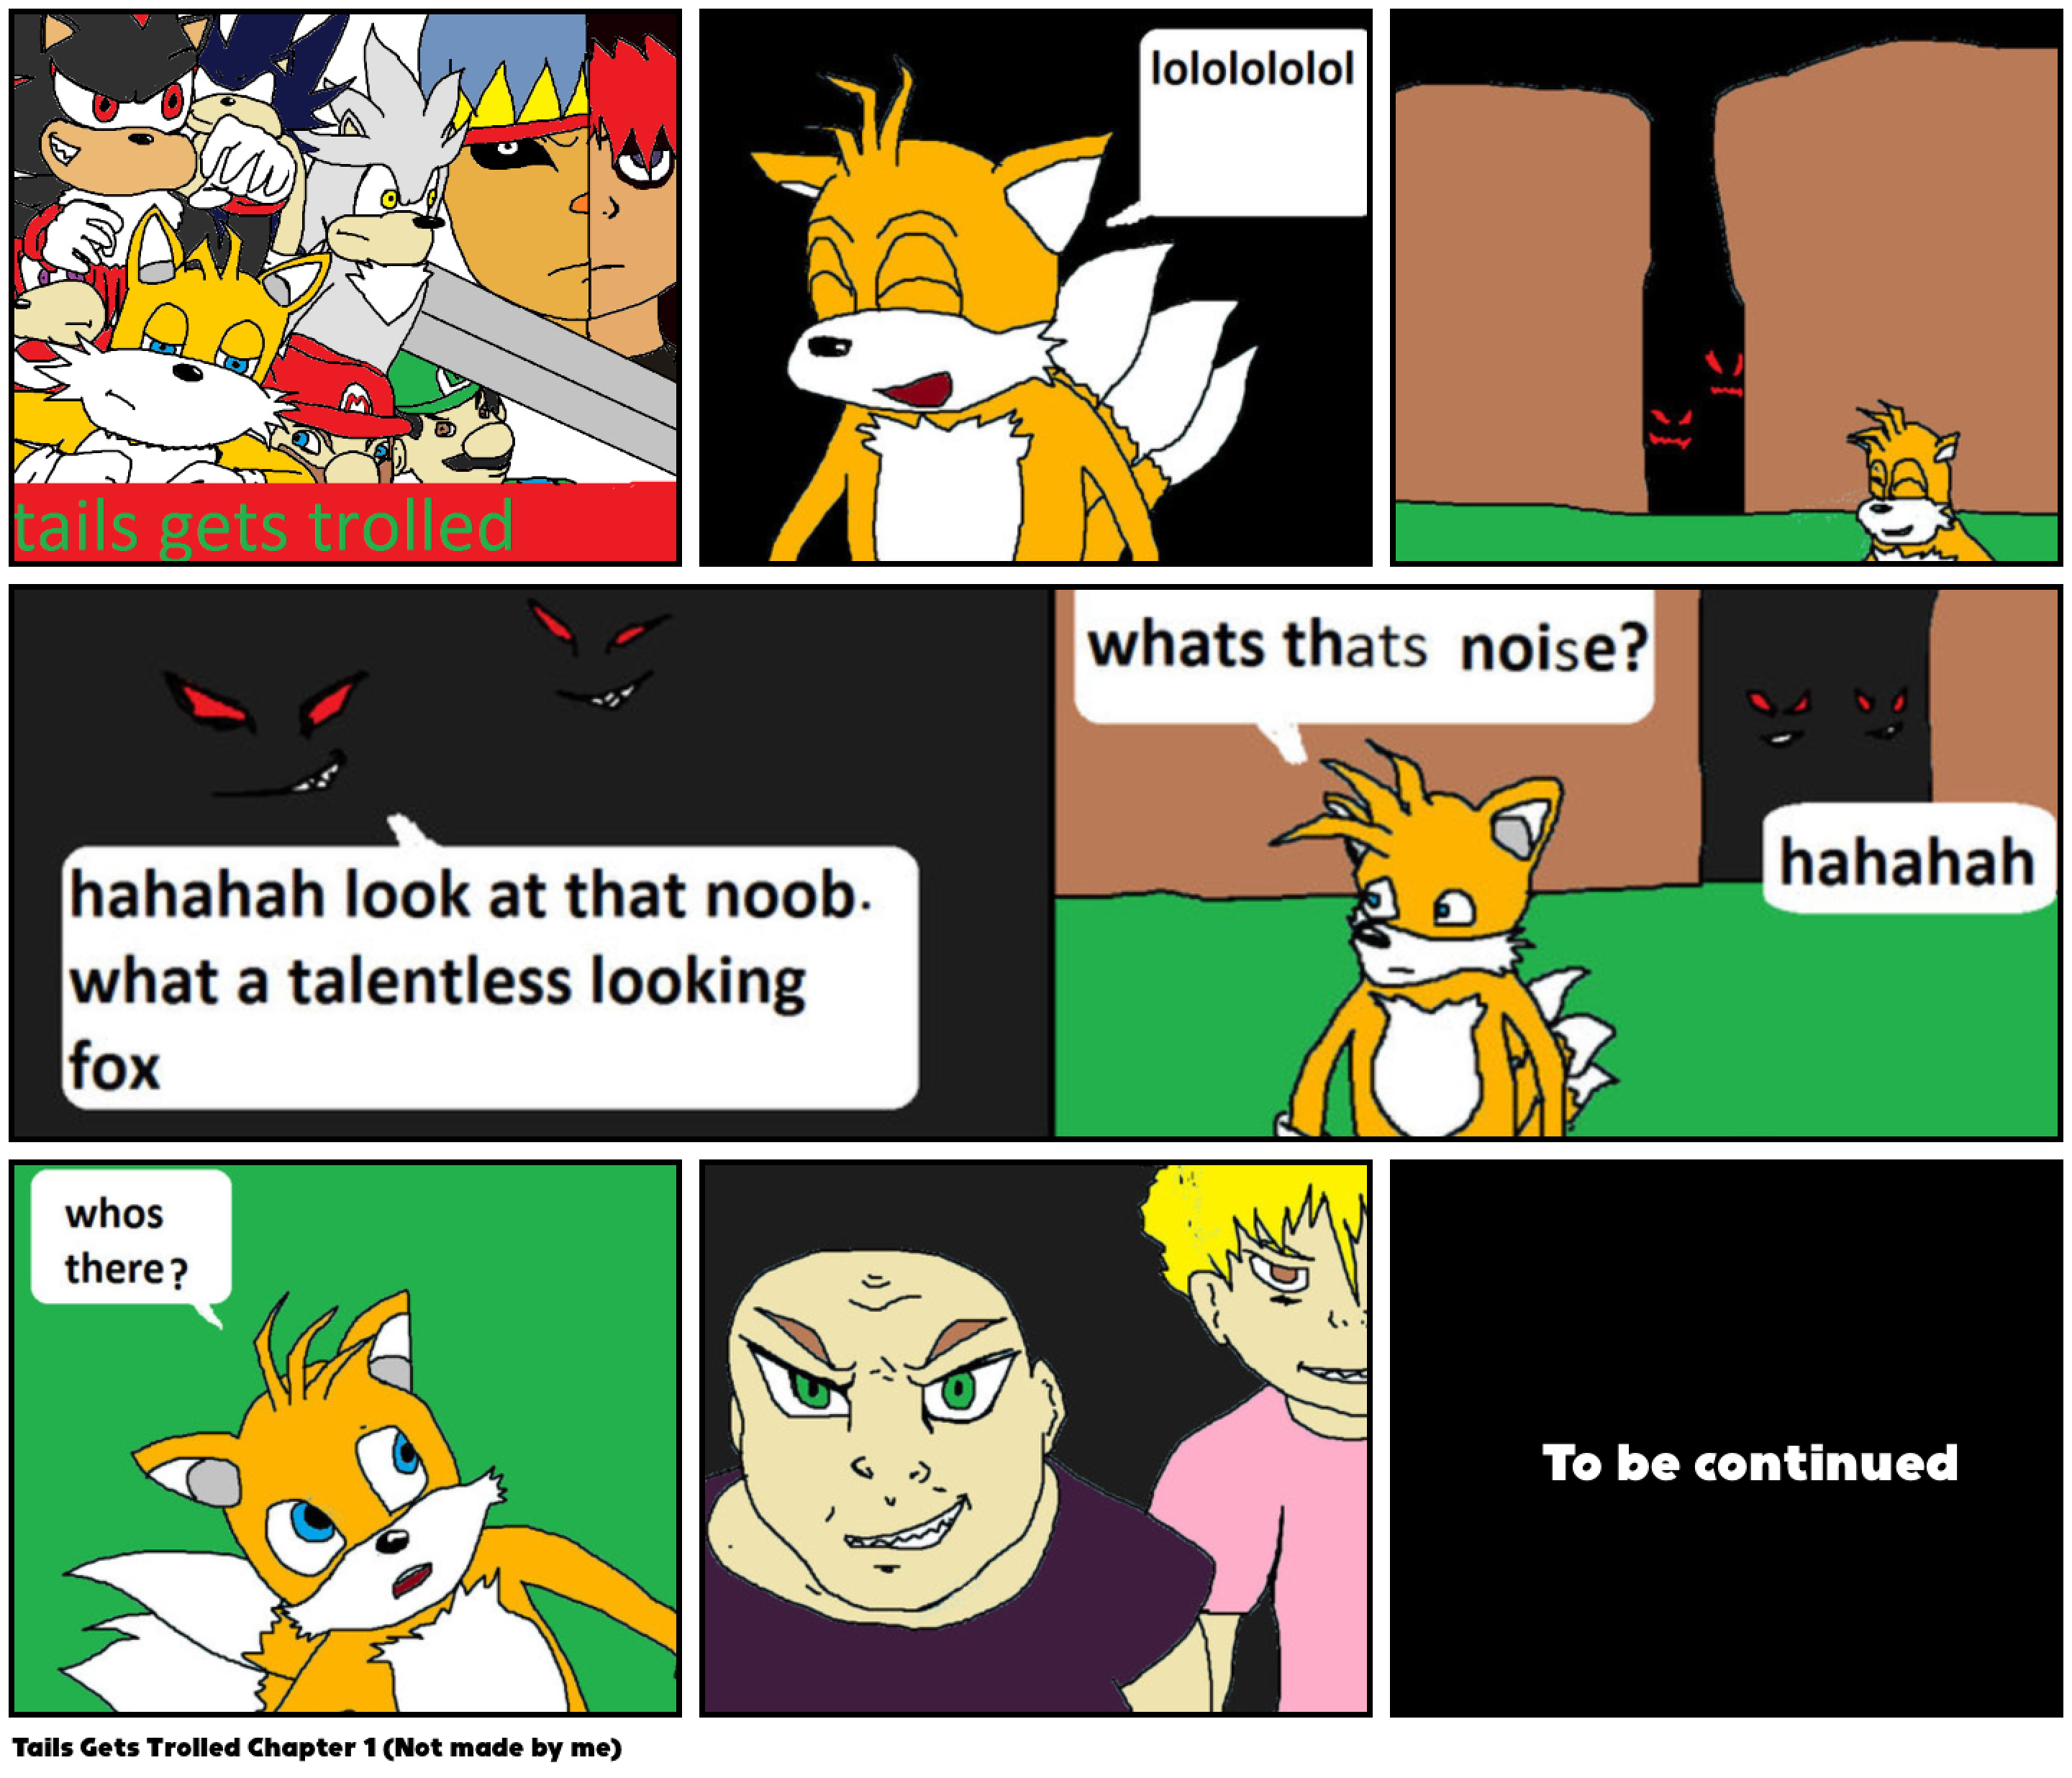 Tails Gets Trolled Chapter 1 (Not made by me)